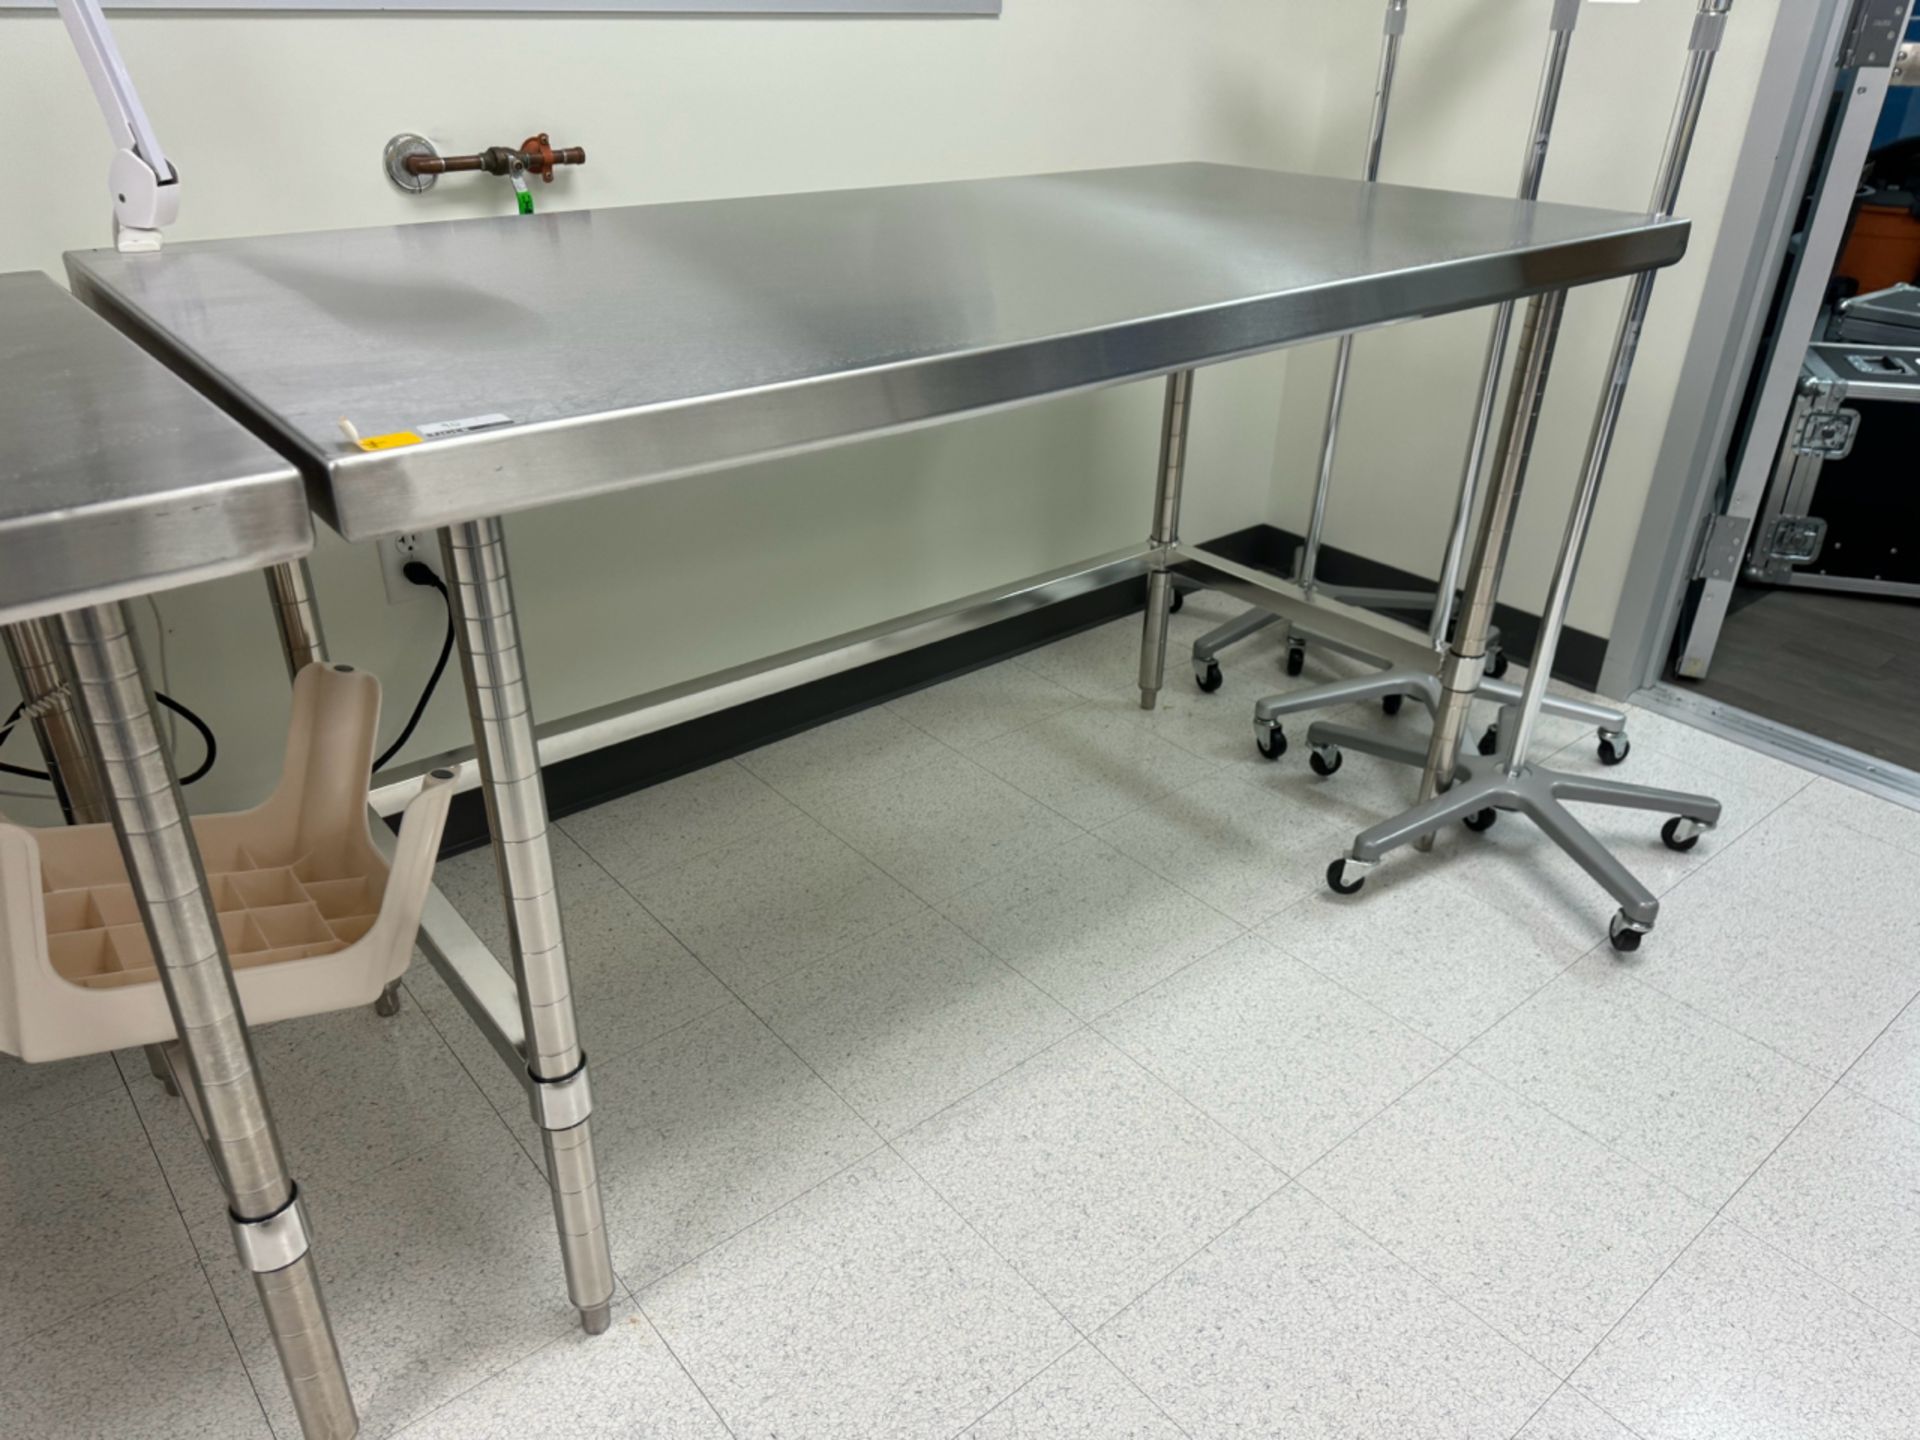 Stainless Steel Work Tables - Image 4 of 4